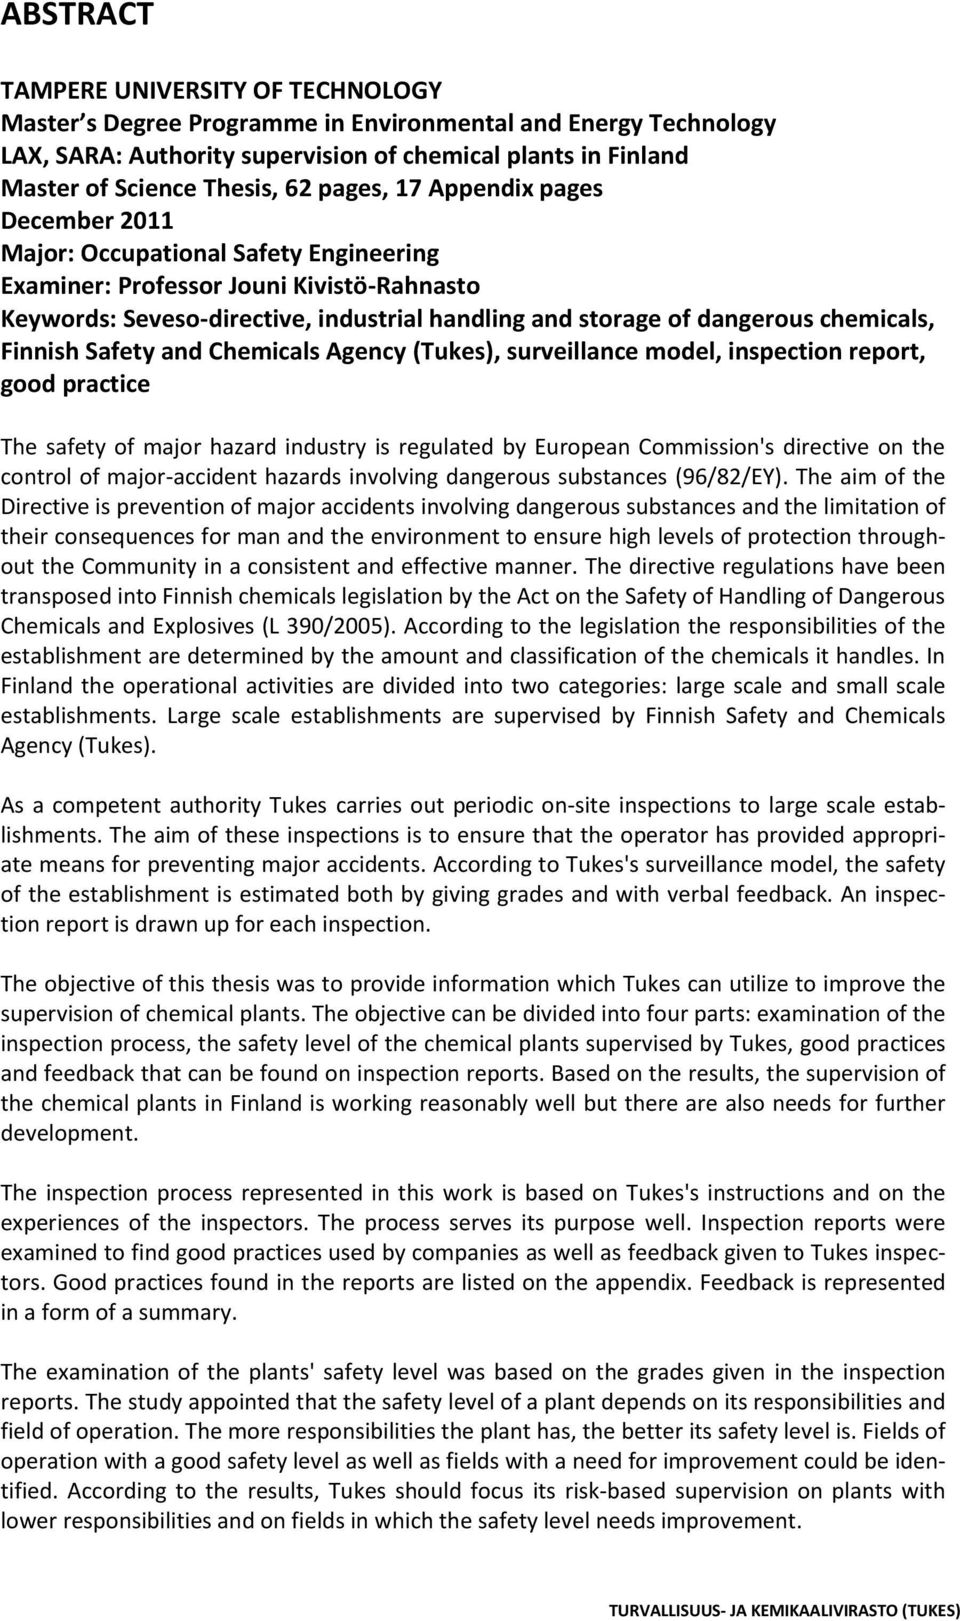 chemicals, Finnish Safety and Chemicals Agency (Tukes), surveillance model, inspection report, good practice The safety of major hazard industry is regulated by European Commission's directive on the